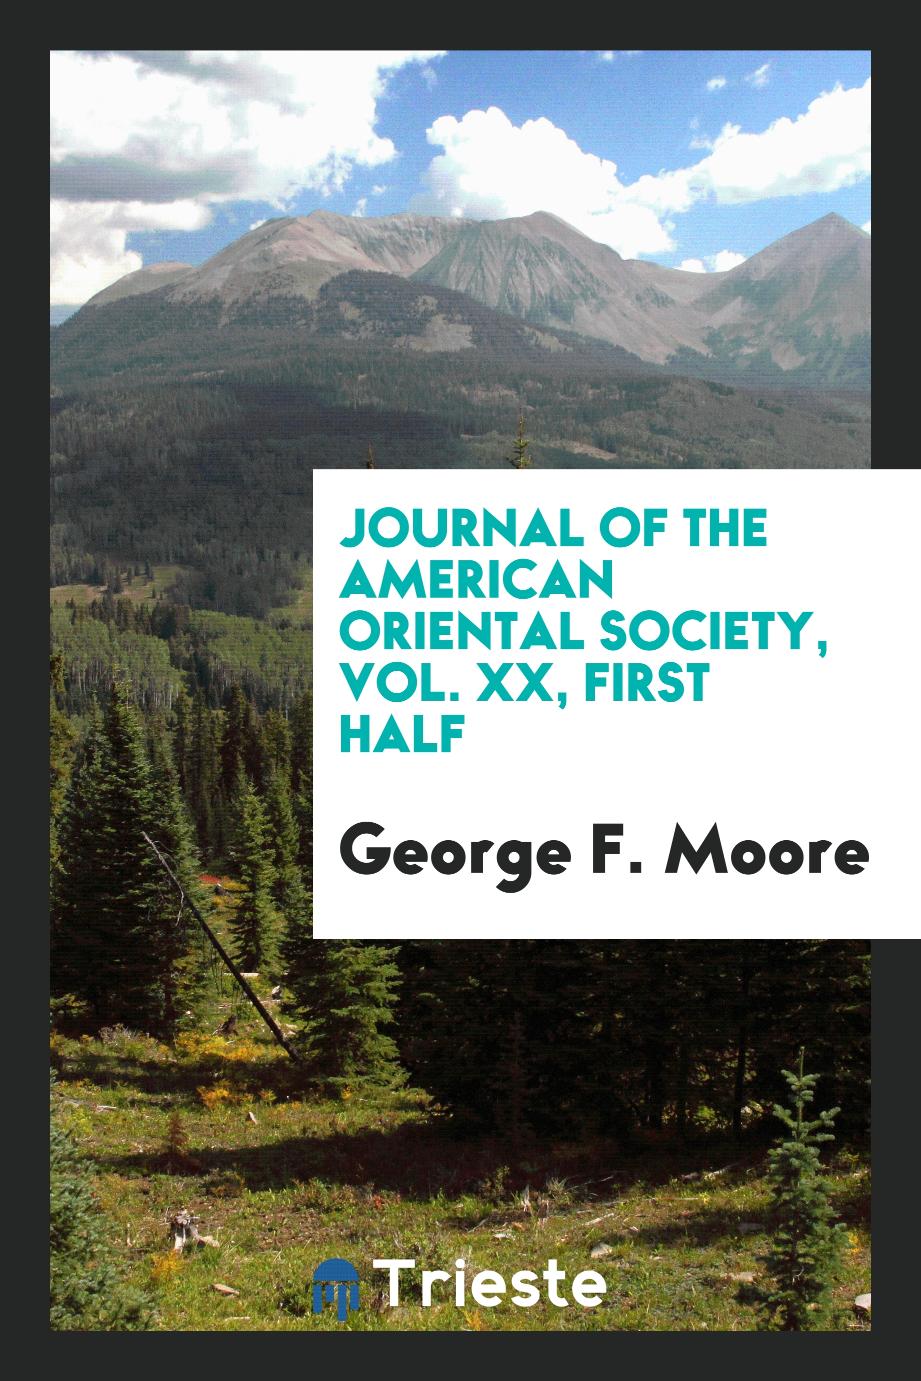 Journal of the American Oriental Society, Vol. XX, First Half